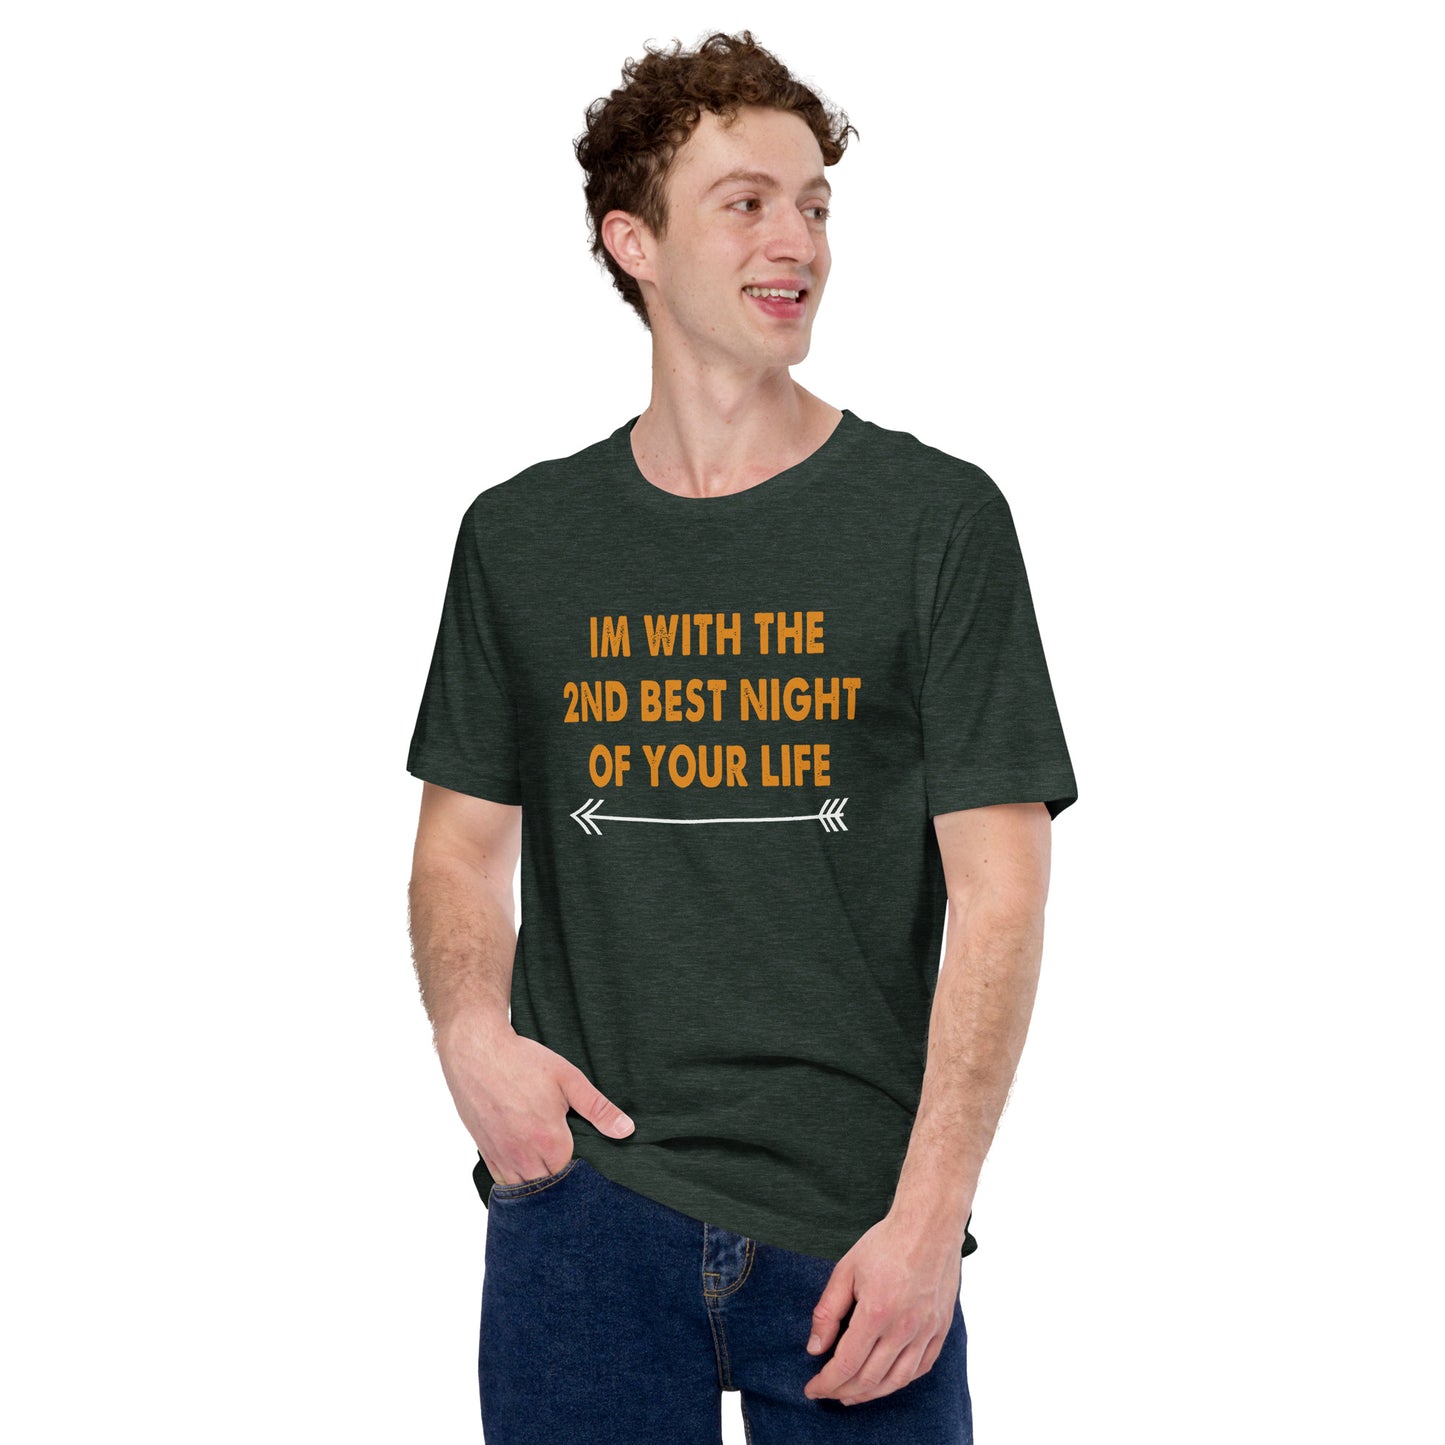 I am with the 2nd best night of your life Unisex t-shirt